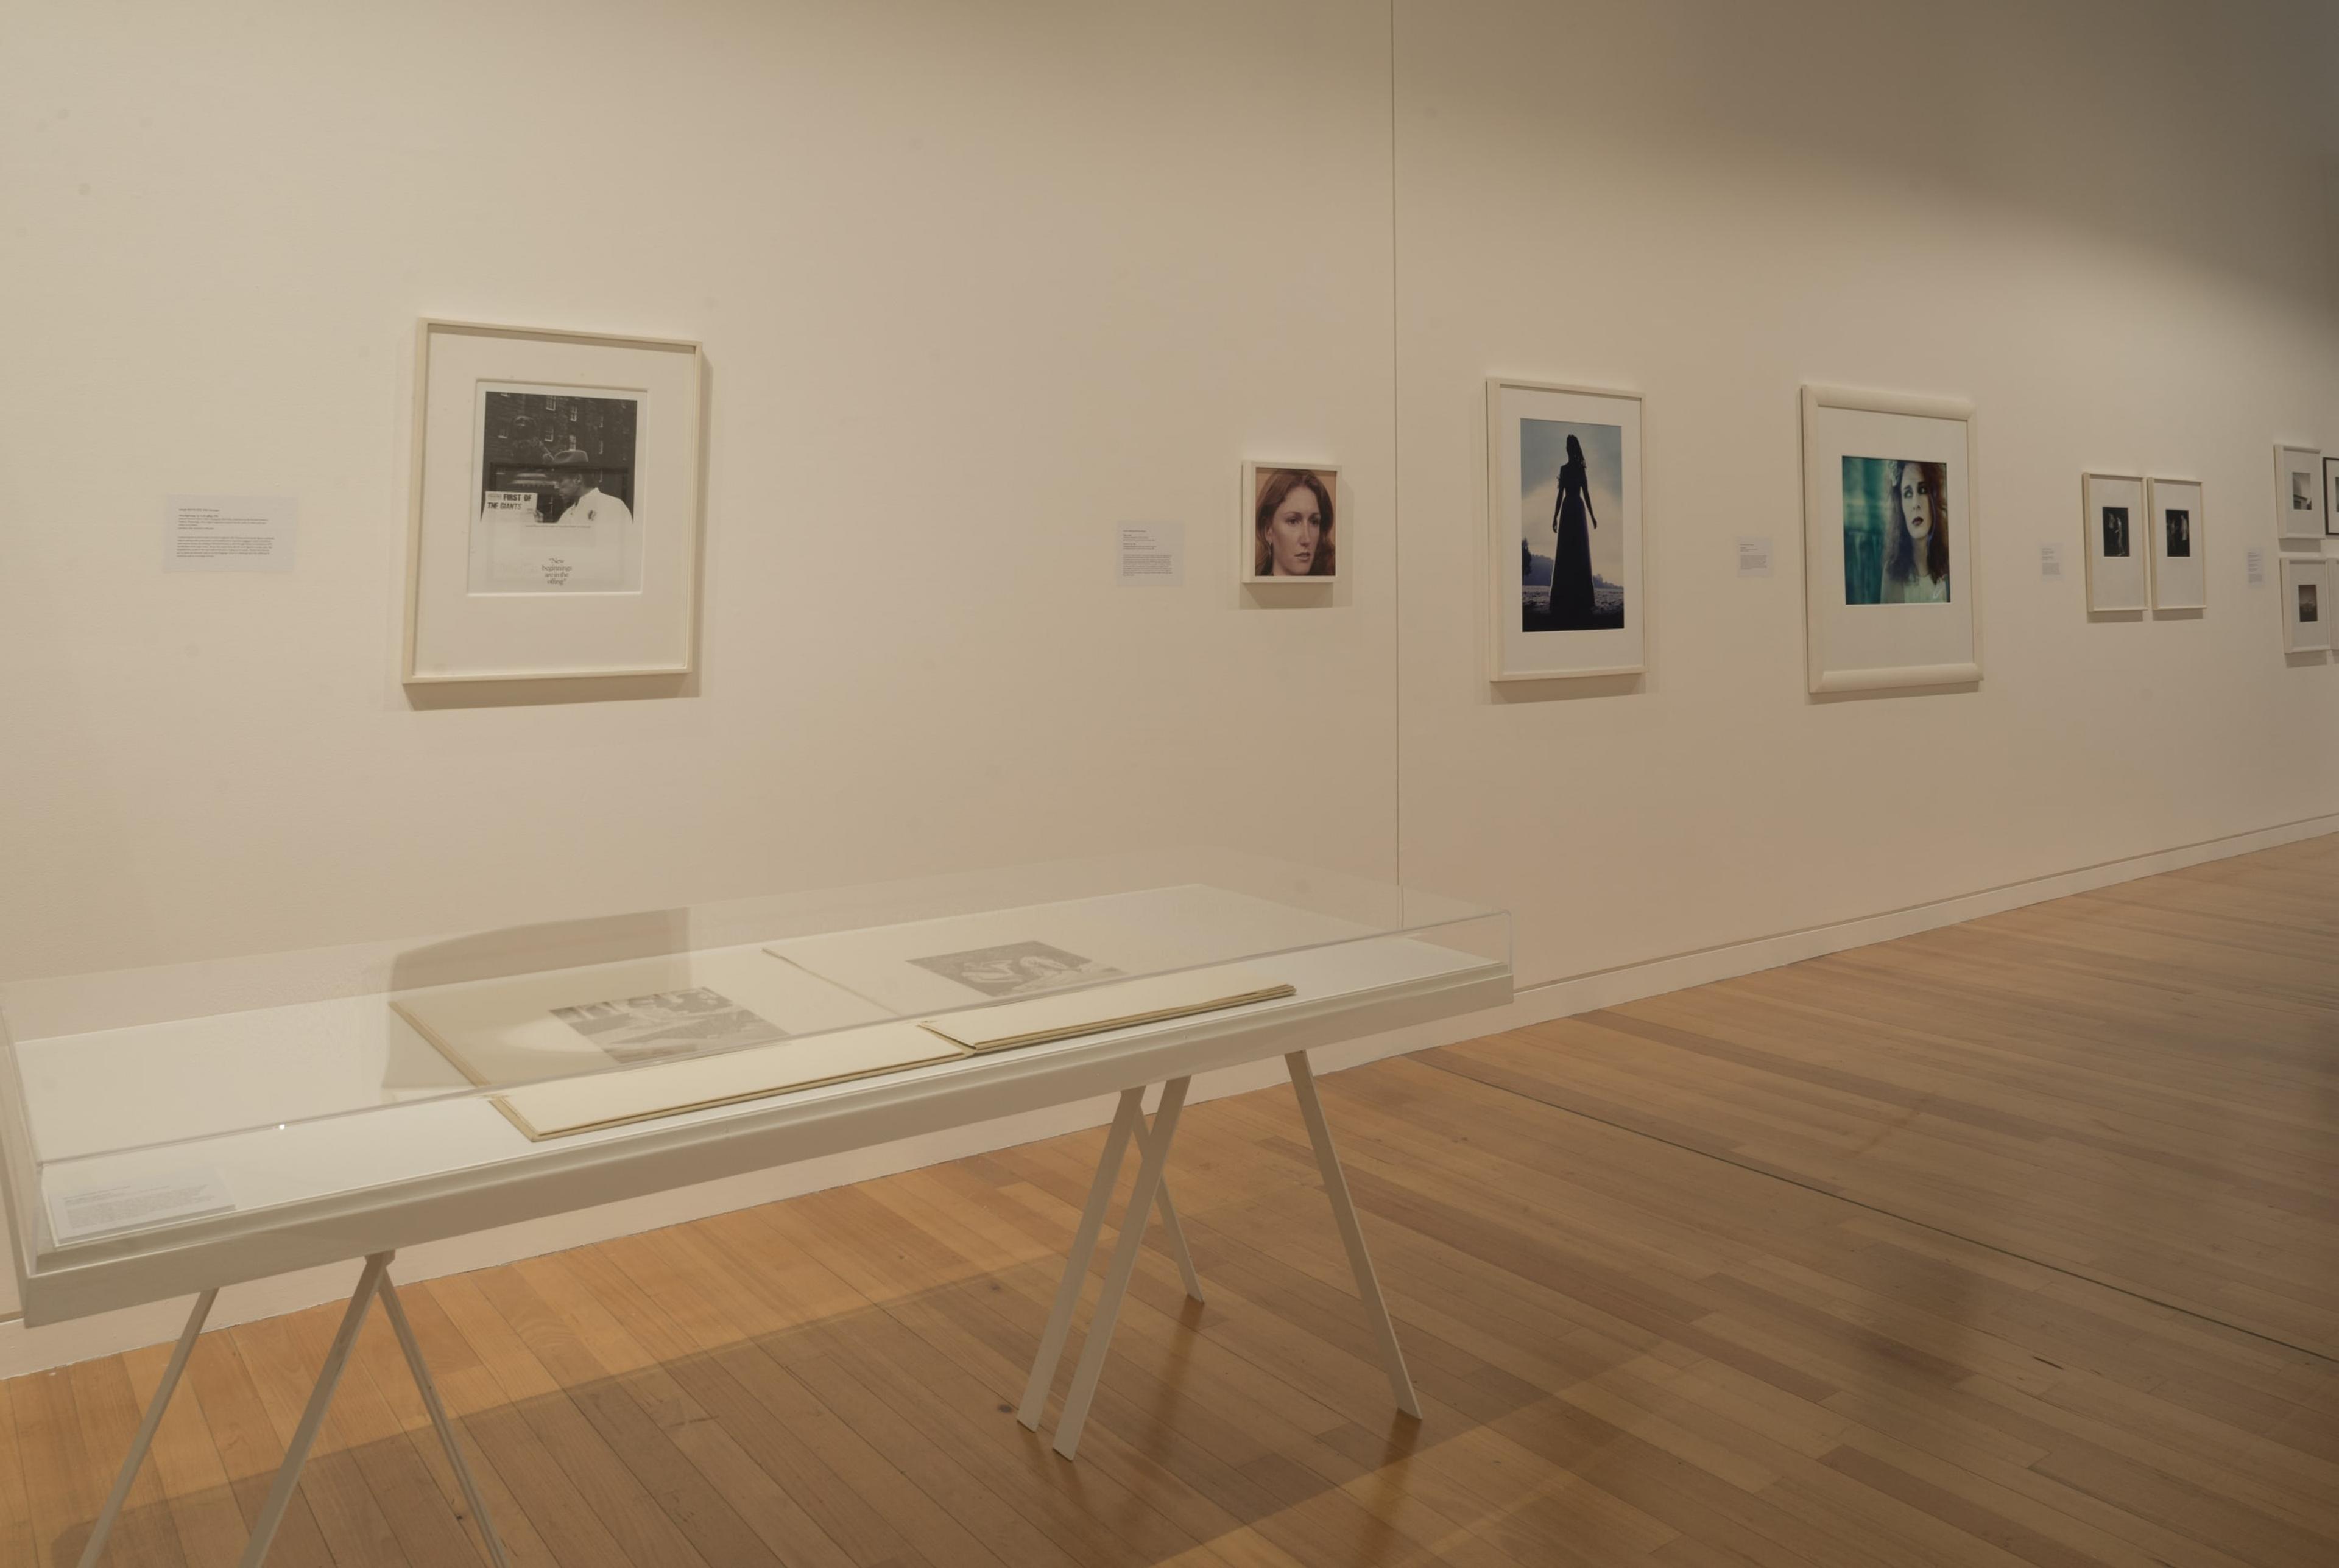 Installation view of Still looking: Peter McLeavey and the last photograph, 6 October – 20 December 2018, Adam Art Gallery Te Pātaka Toi.